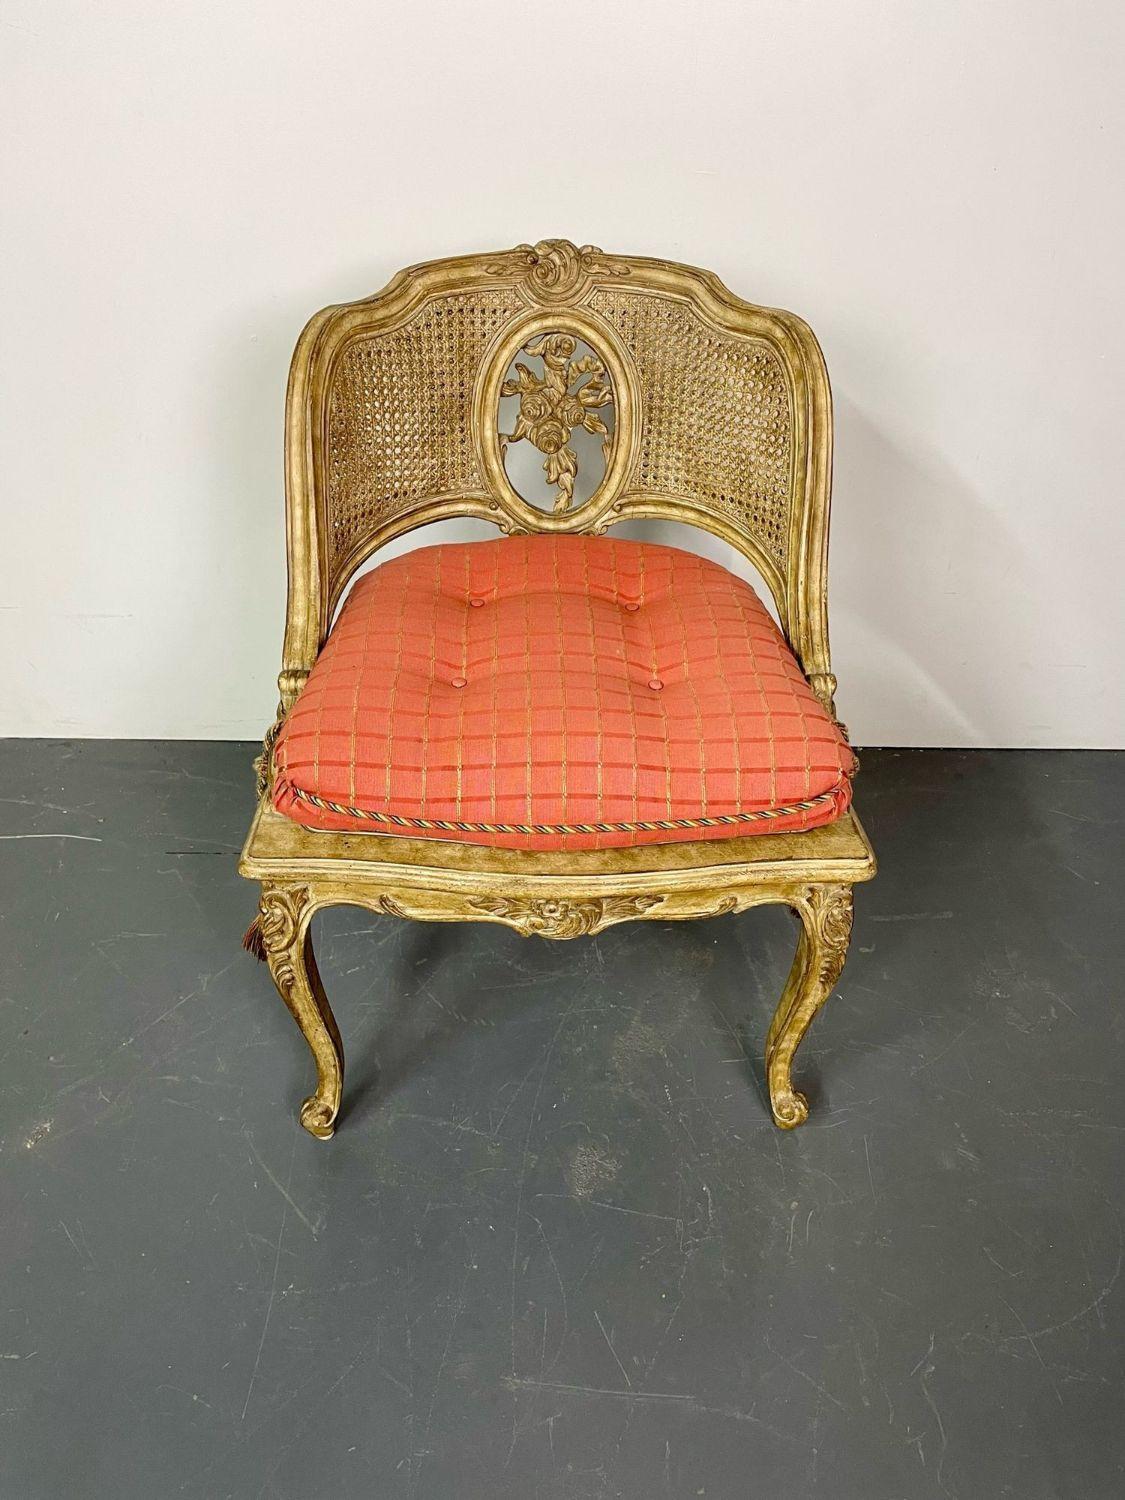 Louis XV style boudoir chair, vanity or hall chair, tufted pillow and tassels

An exceptional carved and cane chair perfect for that small boudoir or vanity, vestibule space. A fine Gustavian finish having a carved cabriole leg and backsplash. A